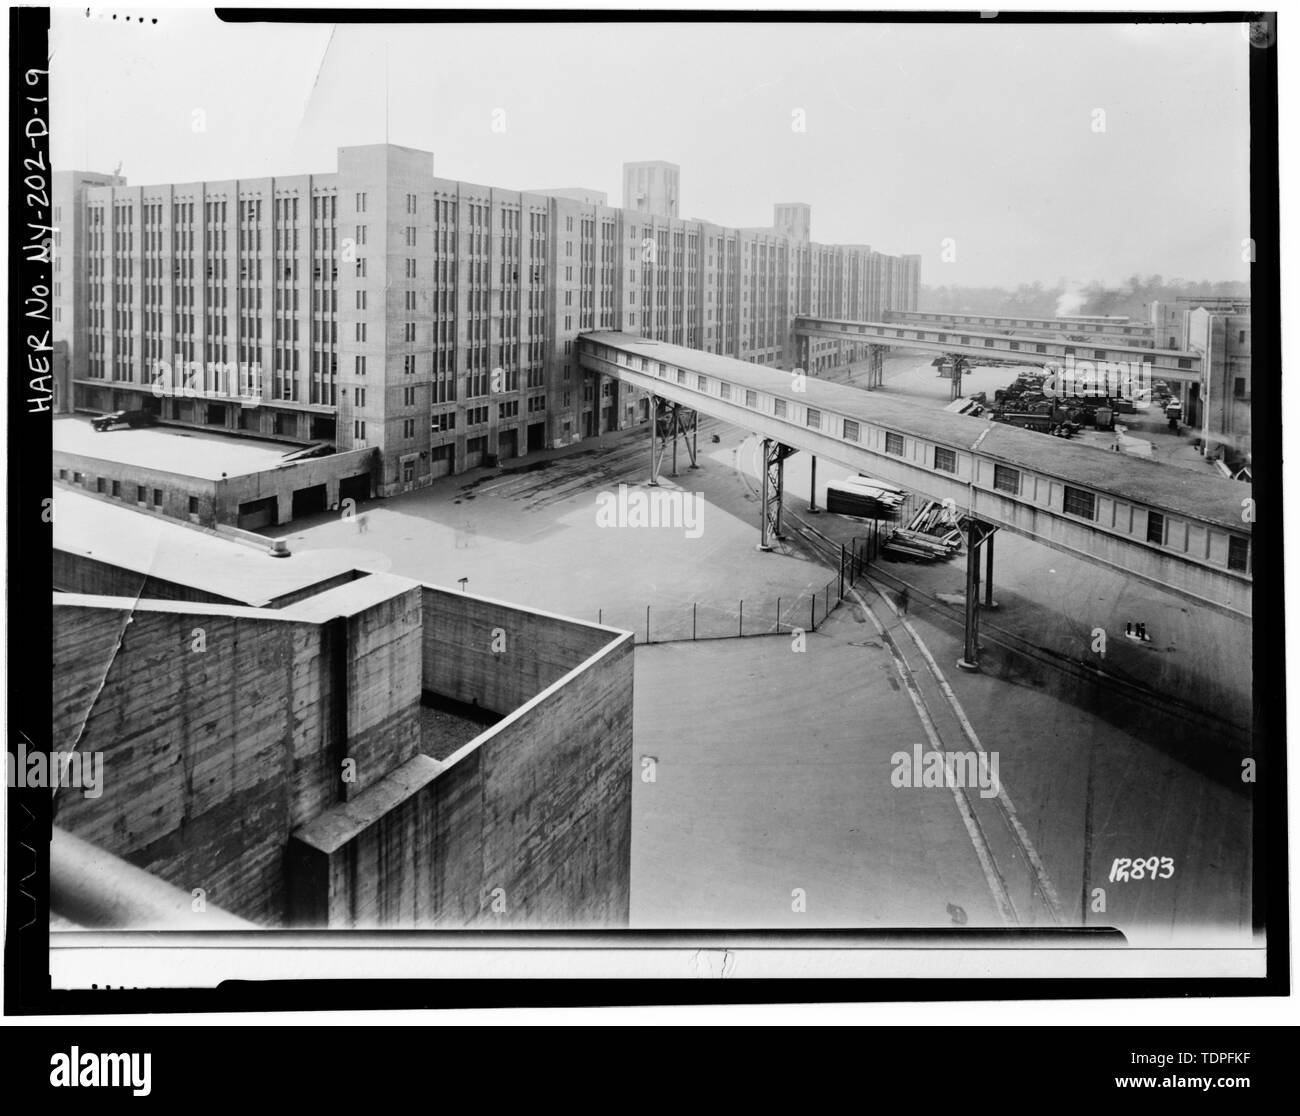 (original in possession of NYC Economic Development Corp.) Photographer and date unknown PIER 4 CONNECTING BRIDGE AND WAREHOUSE A - Brooklyn Army Supply Base, Pier 4, Brooklyn, Kings County, NY Stock Photo